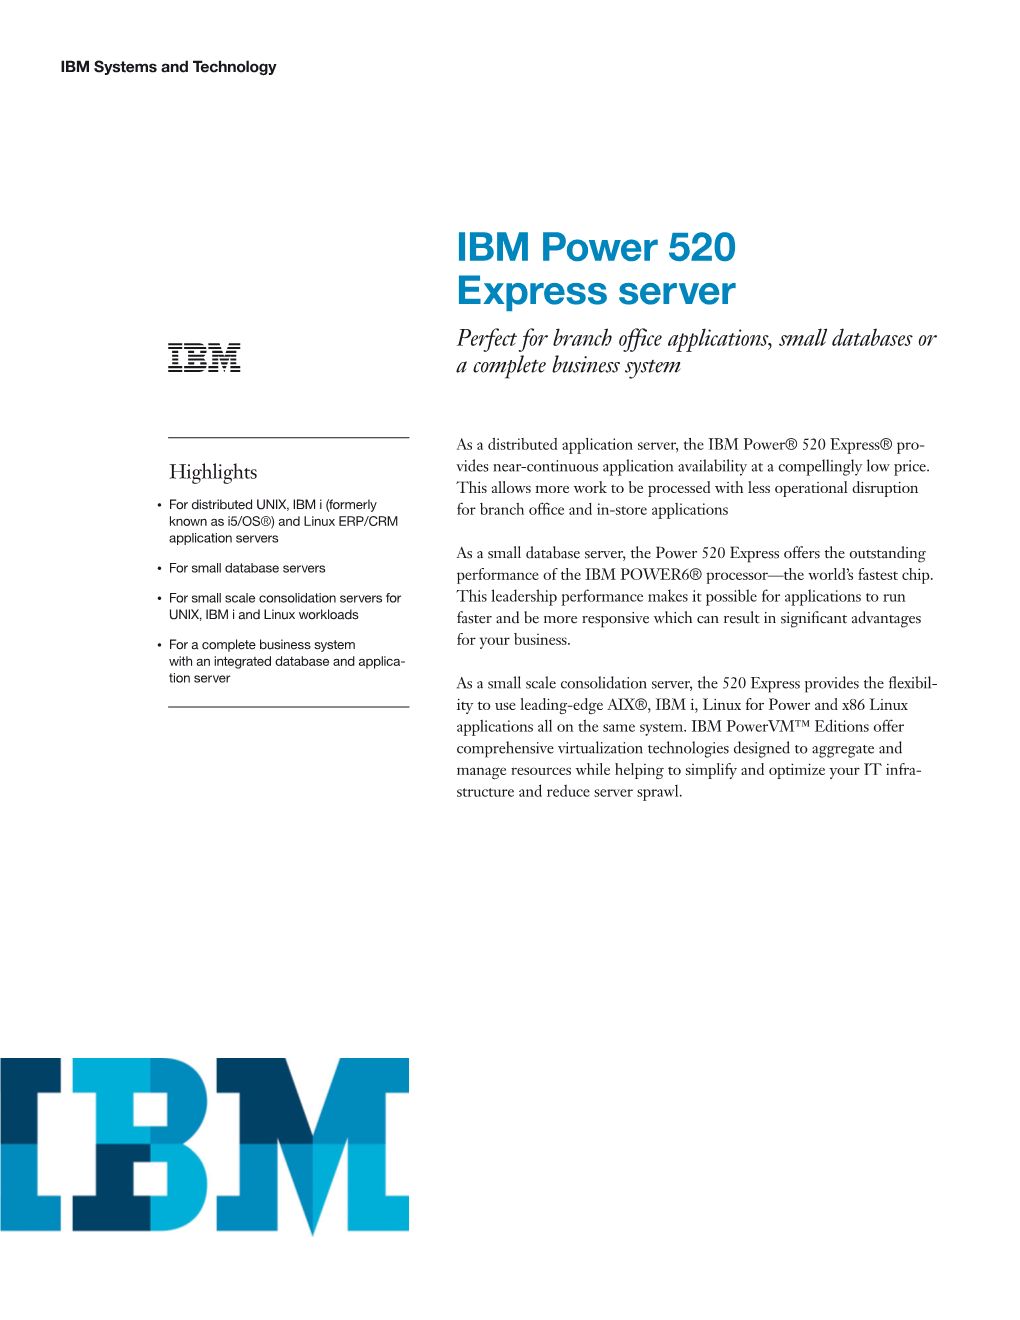 IBM Power 520 Express Server Perfect for Branch Office Applications, Small Databases Or a Complete Business System